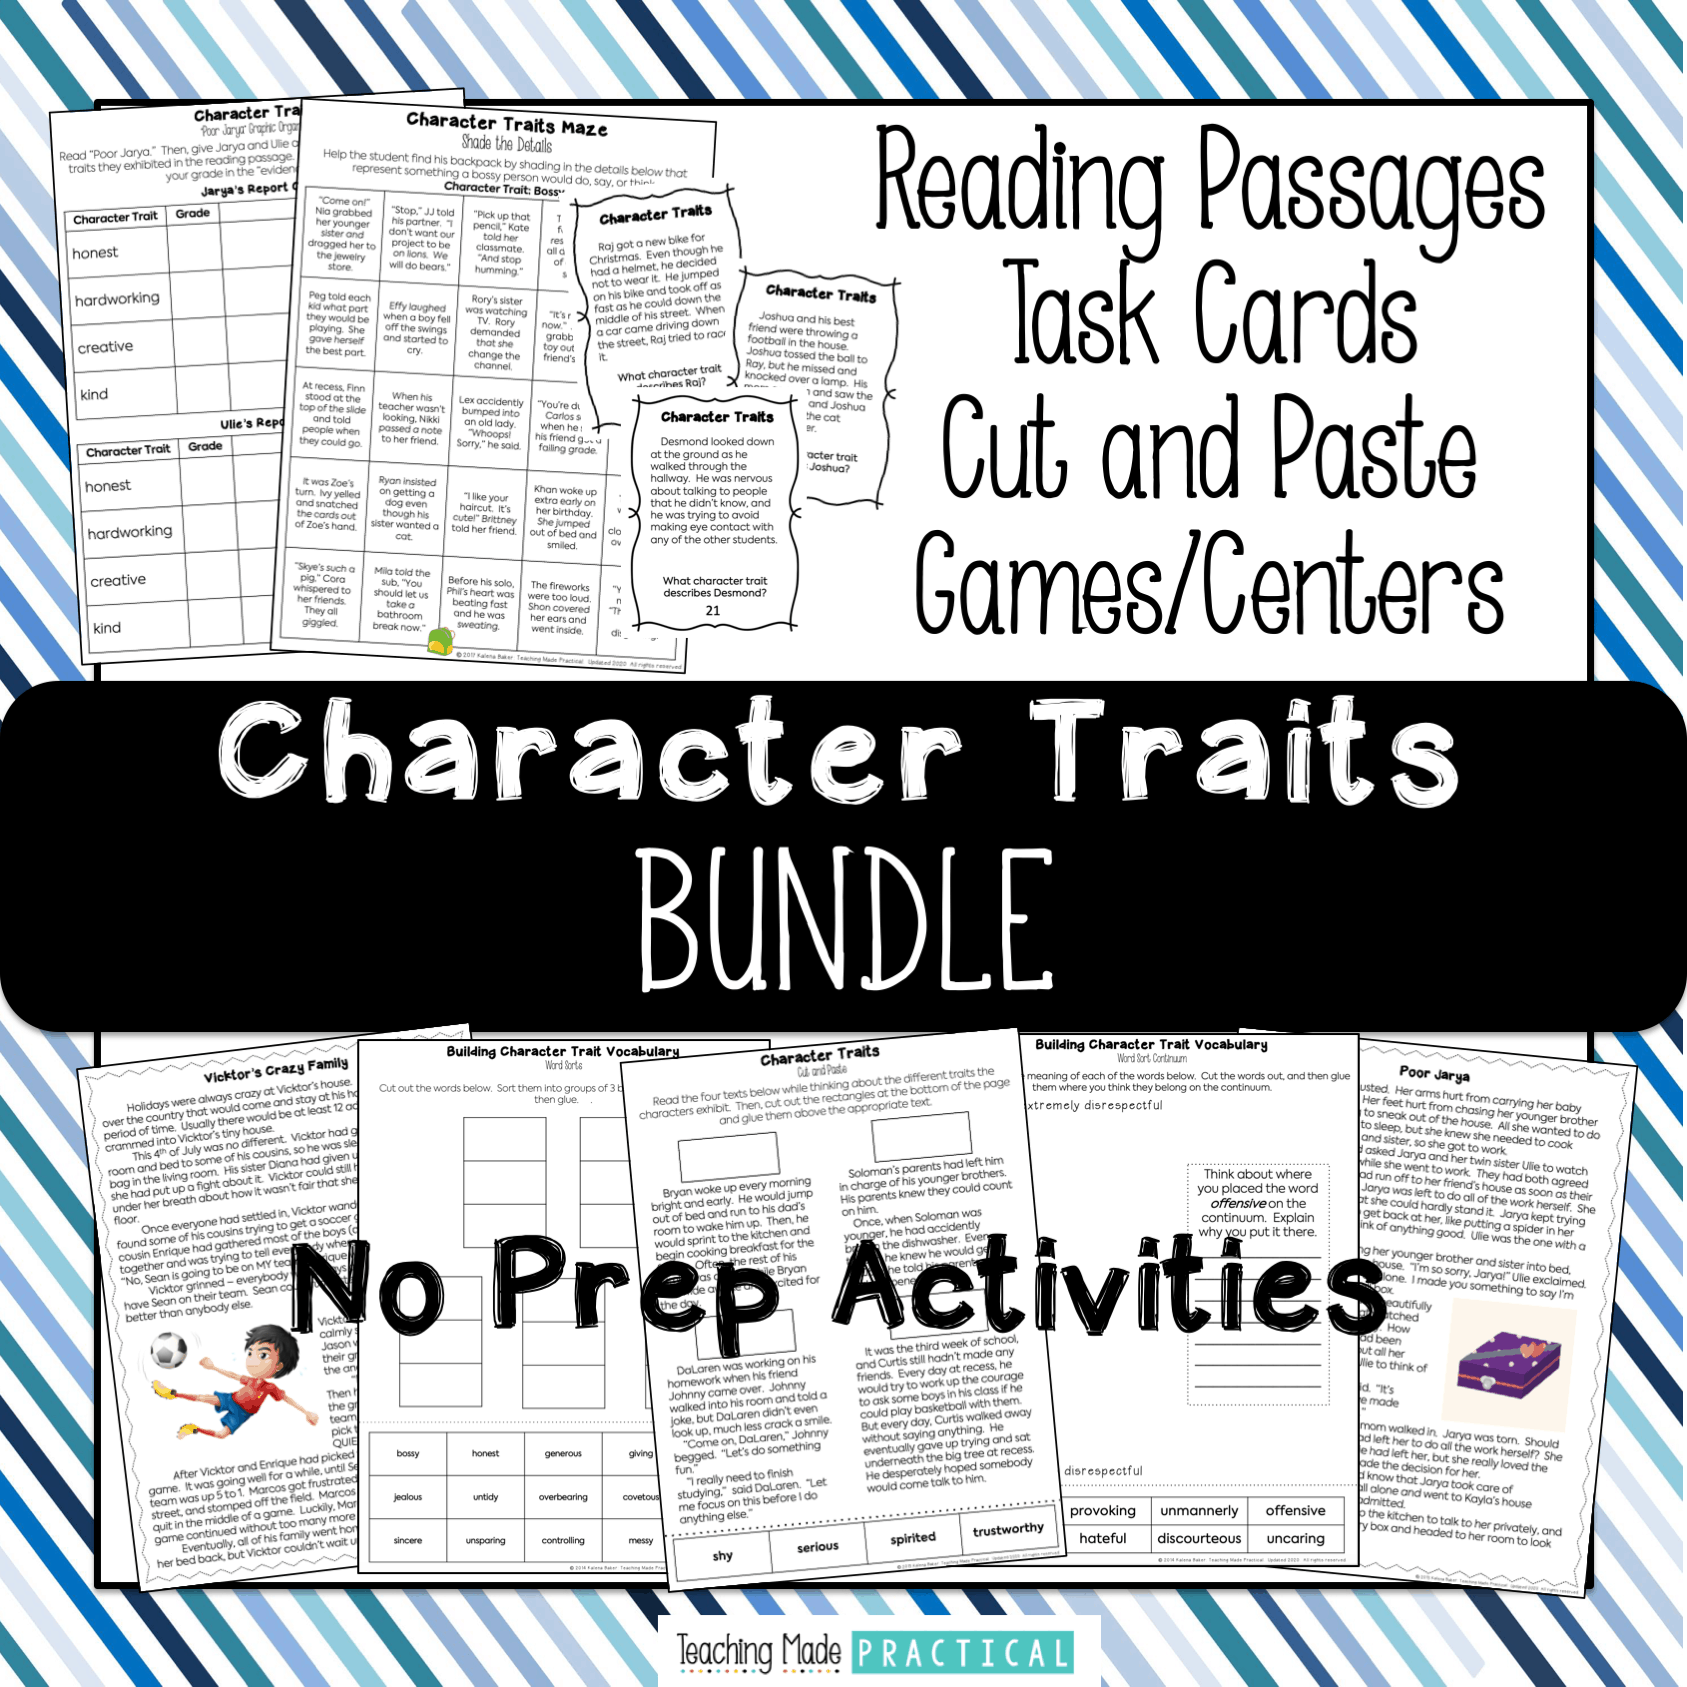 If you like the free character trait slideshow, then the 3rd, 4th, and 5th grade resources in this bundle will be useful for your classroom.  